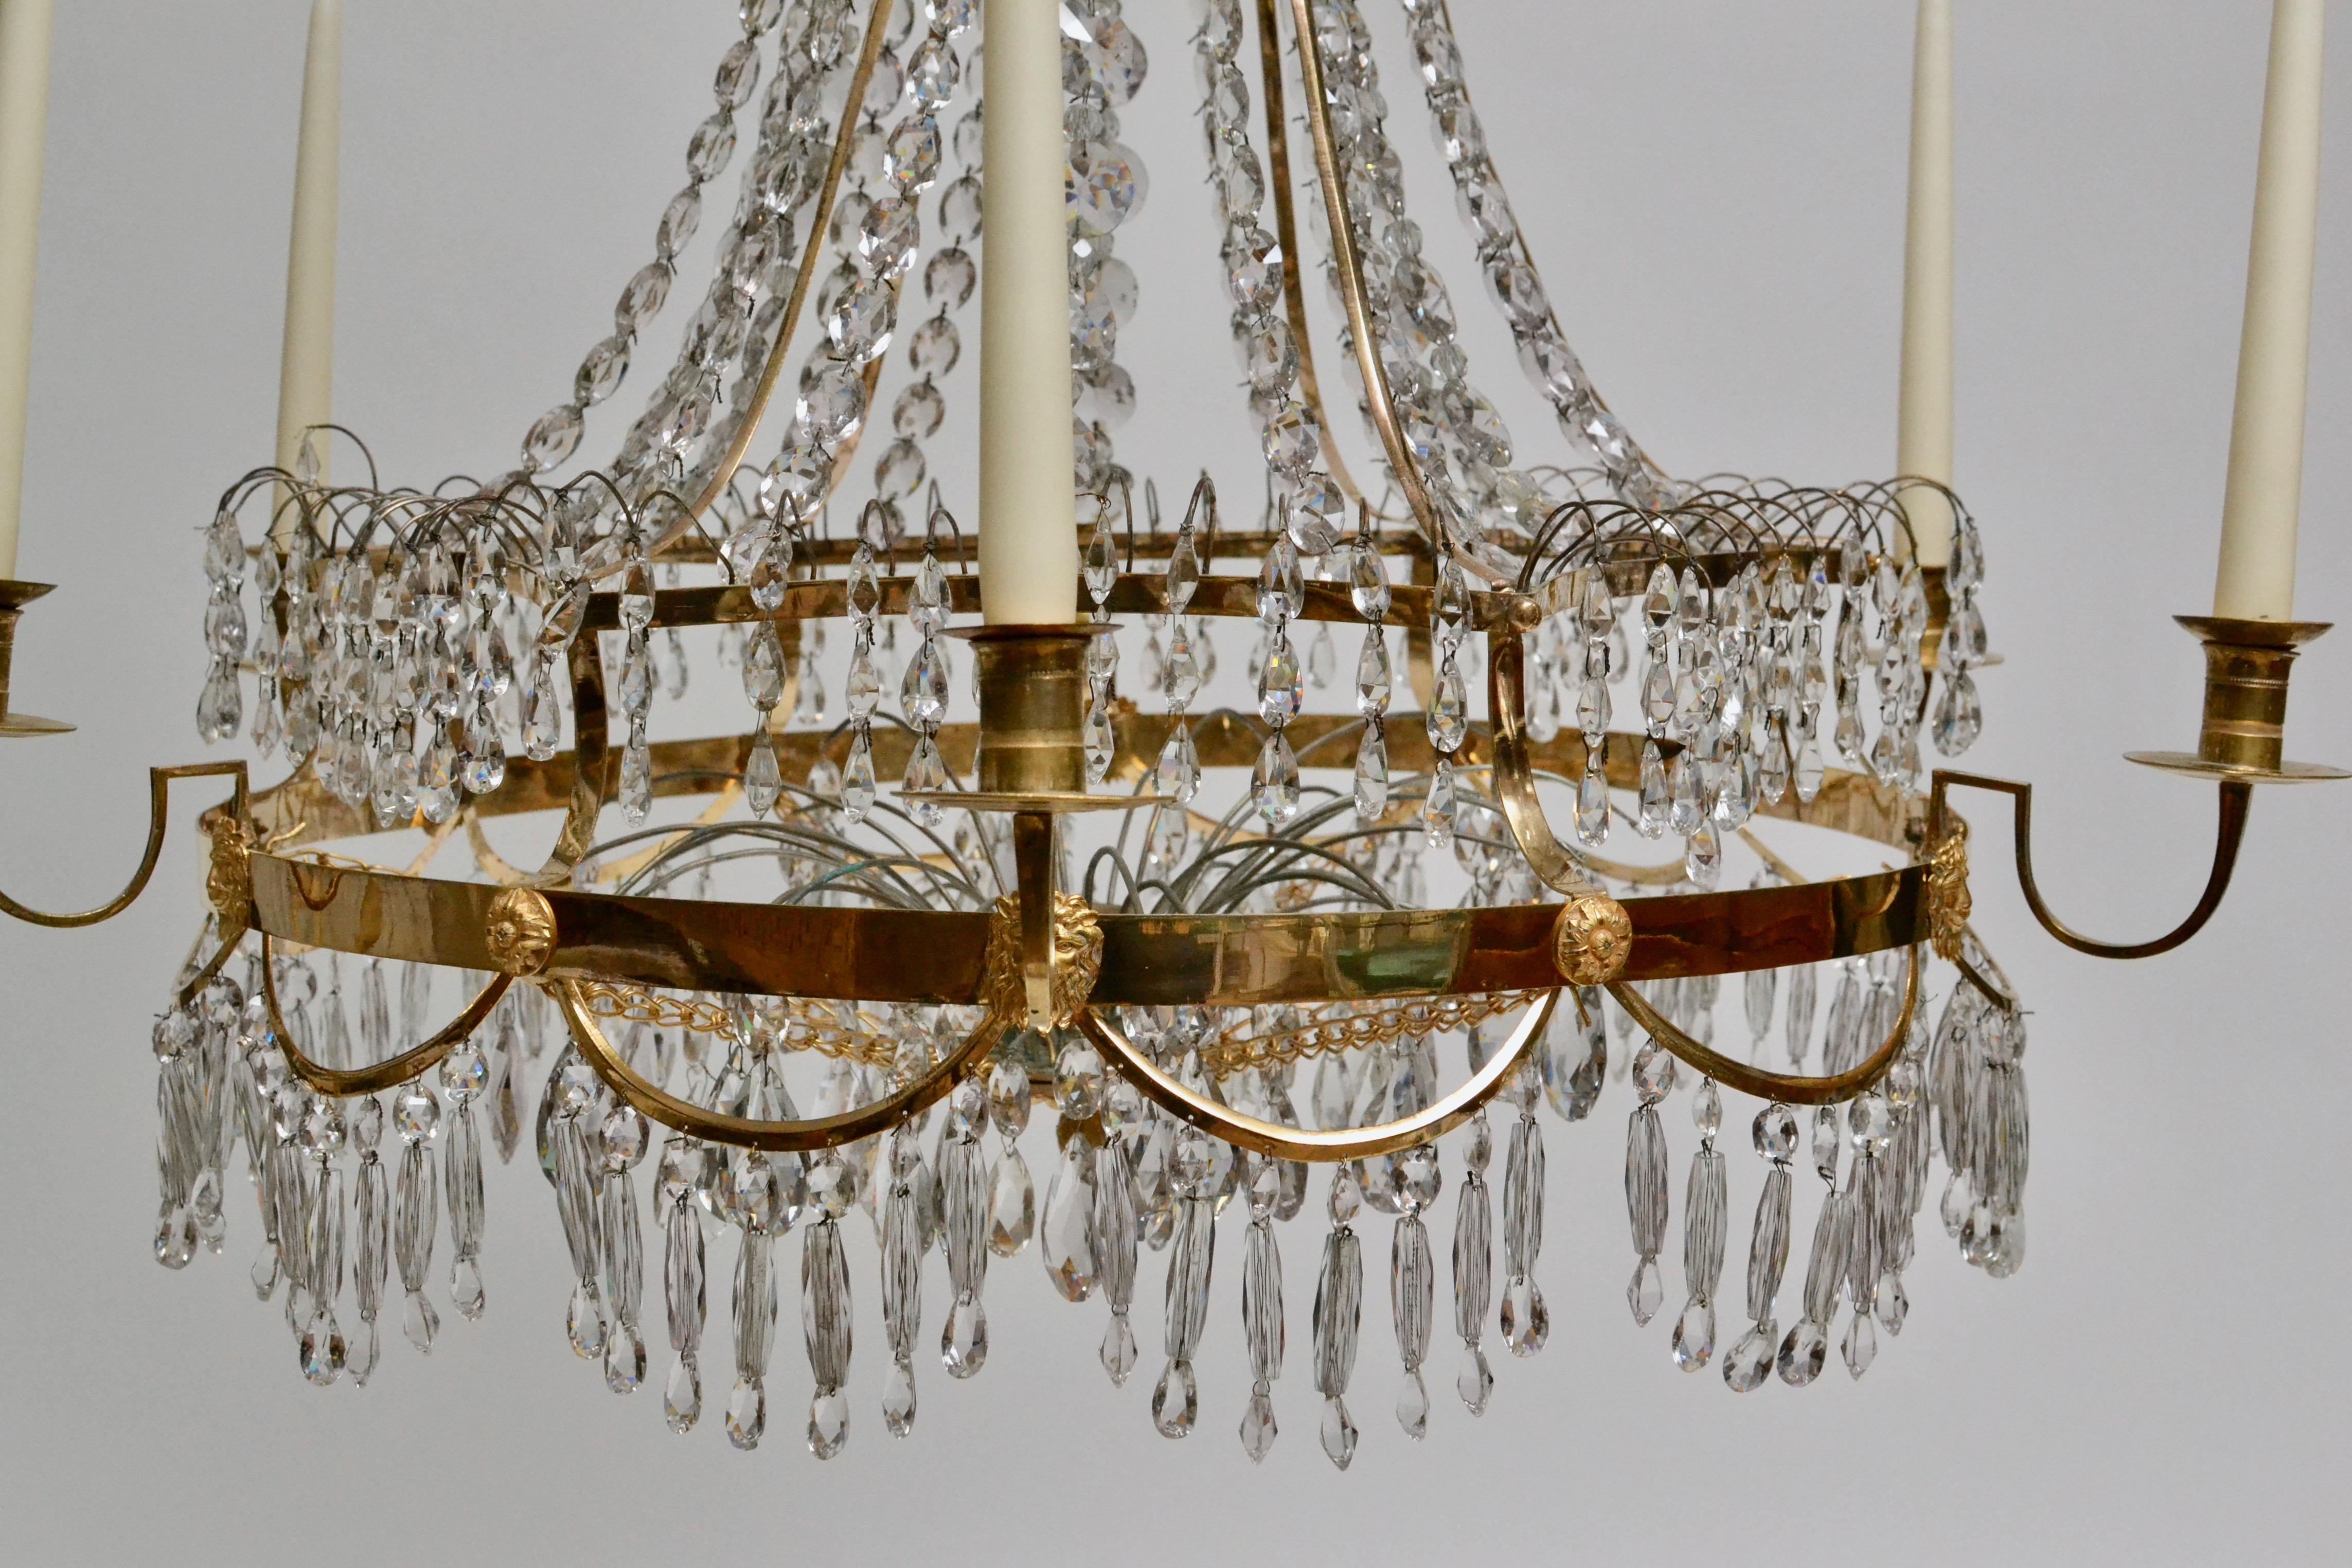 A Swedish Gustavian gilt bronze and crystal chandelier made in Stockholm, circa 1800. Very nice condition and quality.